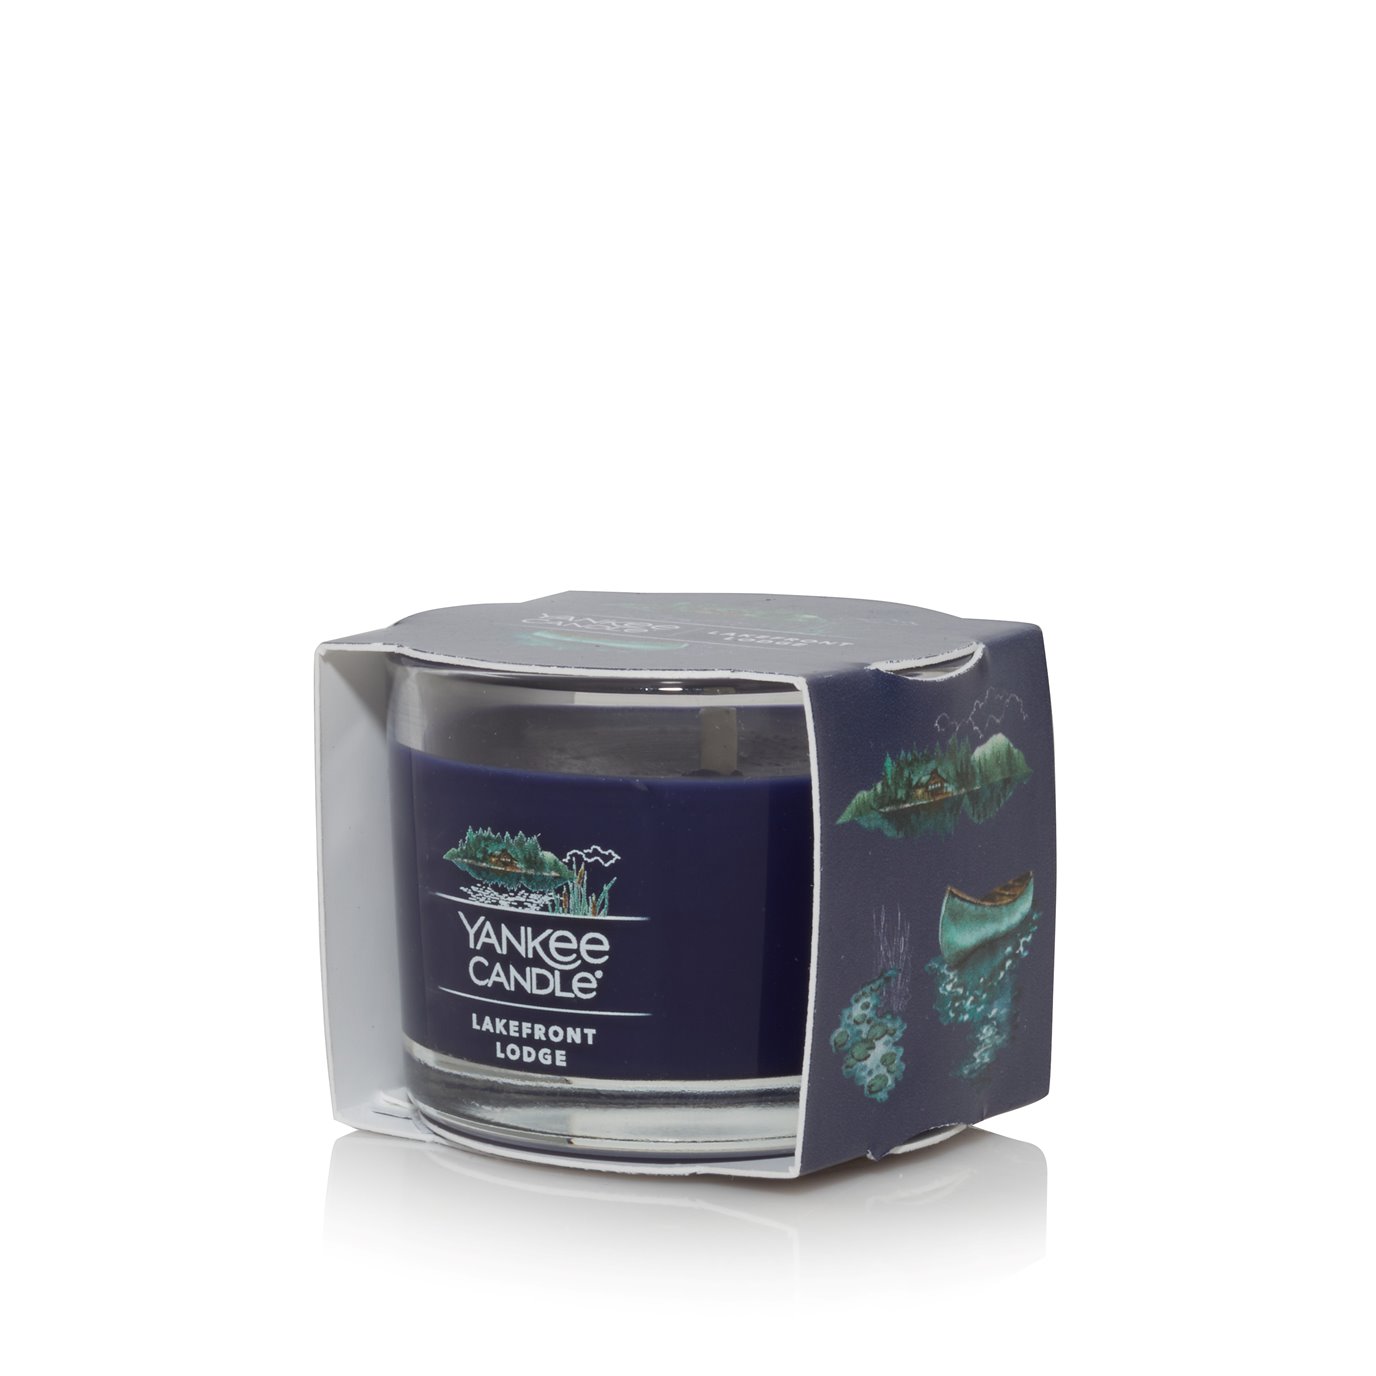 Lakefront Lodge Mini Candle by Yankee Candle